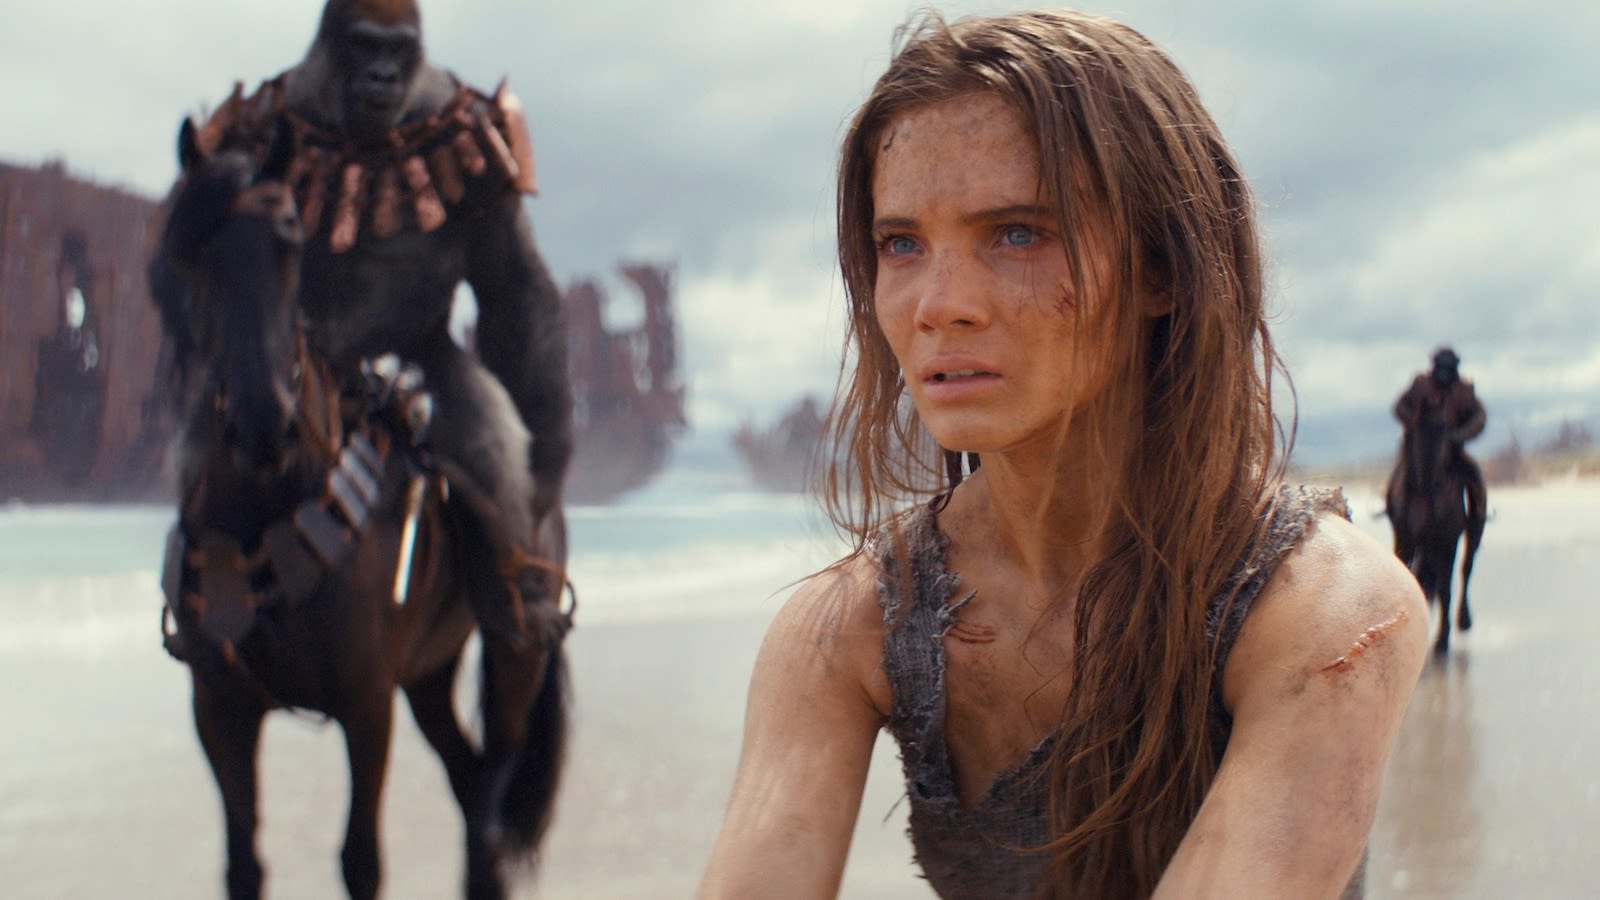 'Kingdom of the Planet of the Apes' rules box office with $56.5M opening